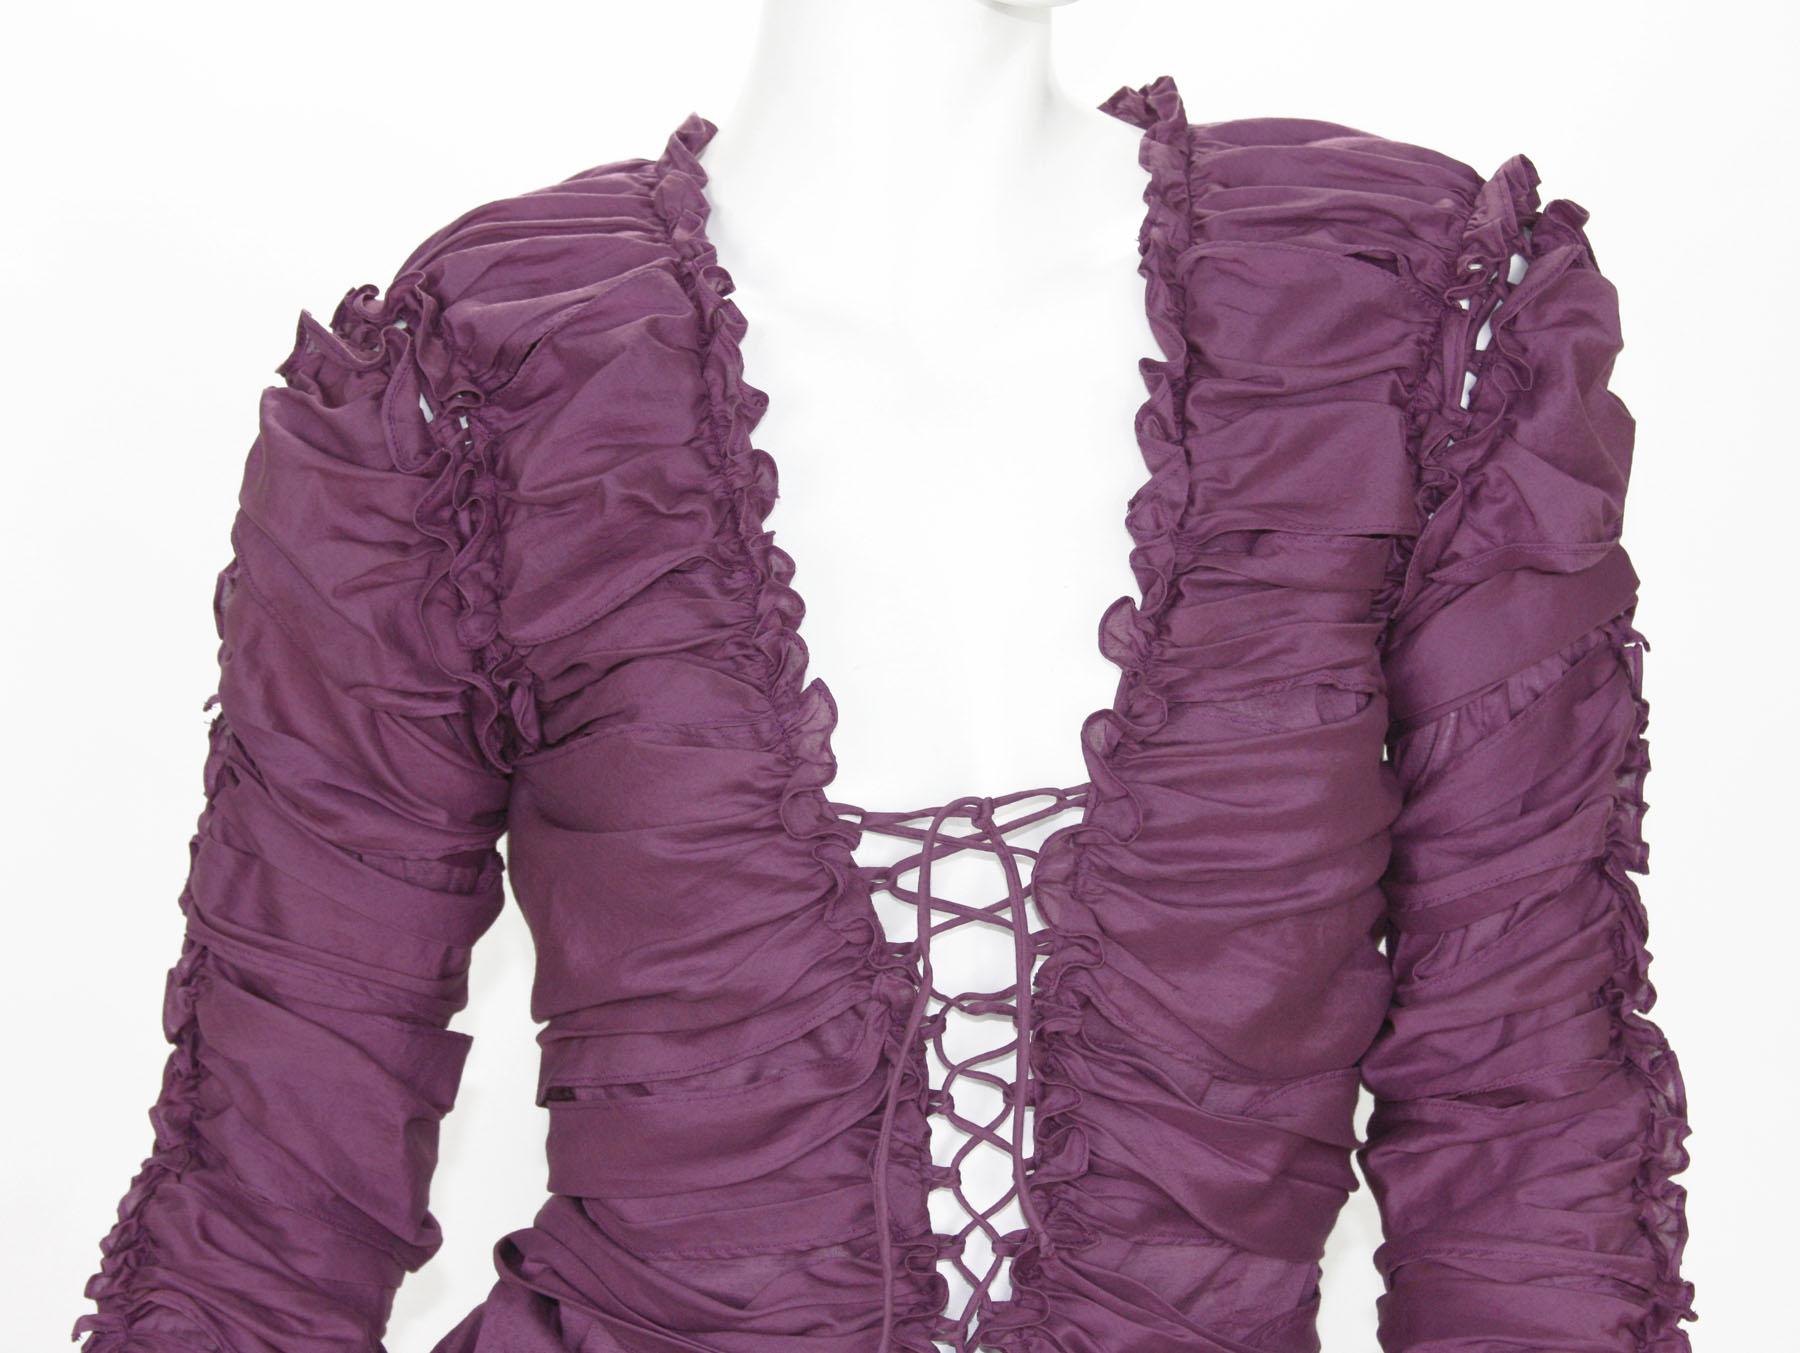 TOM FORD for YVES SAINT LAURENT F/W 2001 Plum Lace-Up Top Blouse Fr 40 - US 6/8 1